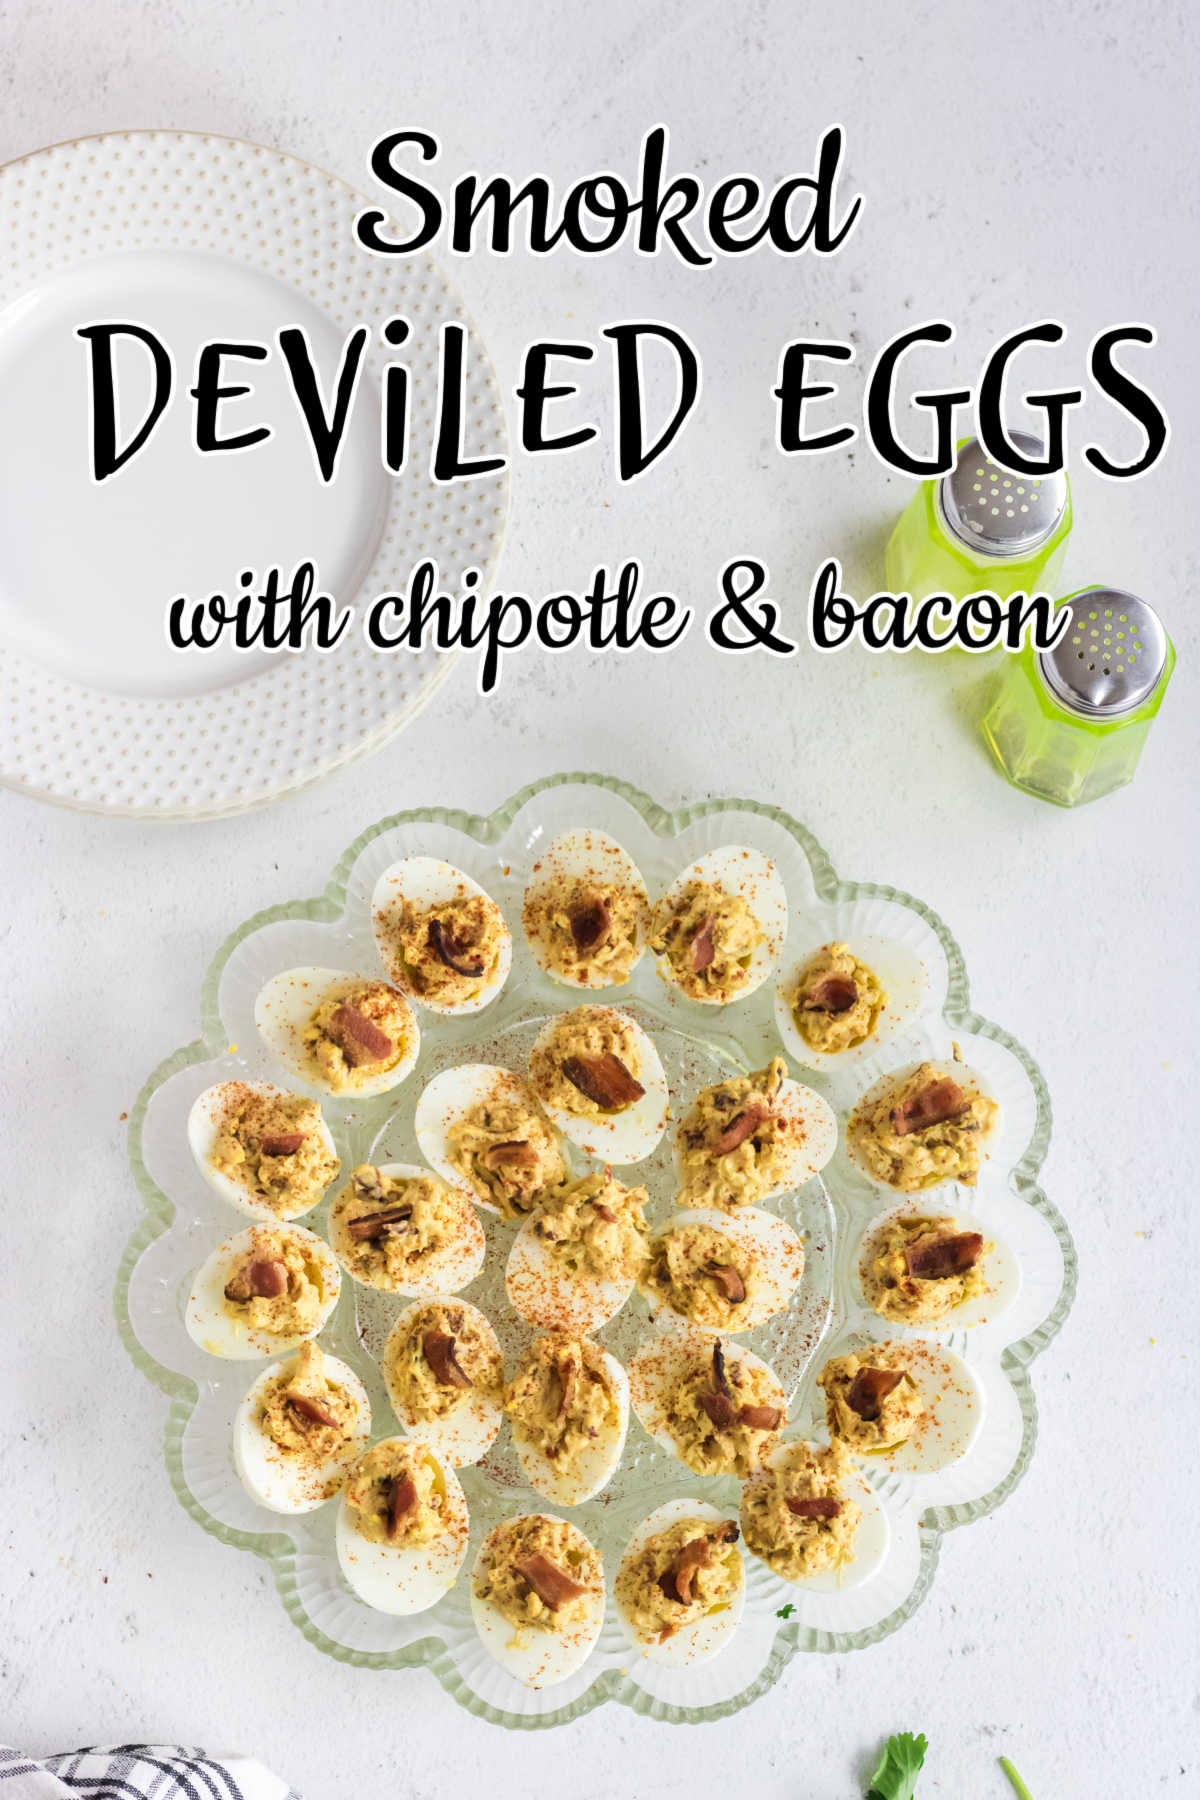 Overhead view of deviled eggs with title text overlay.